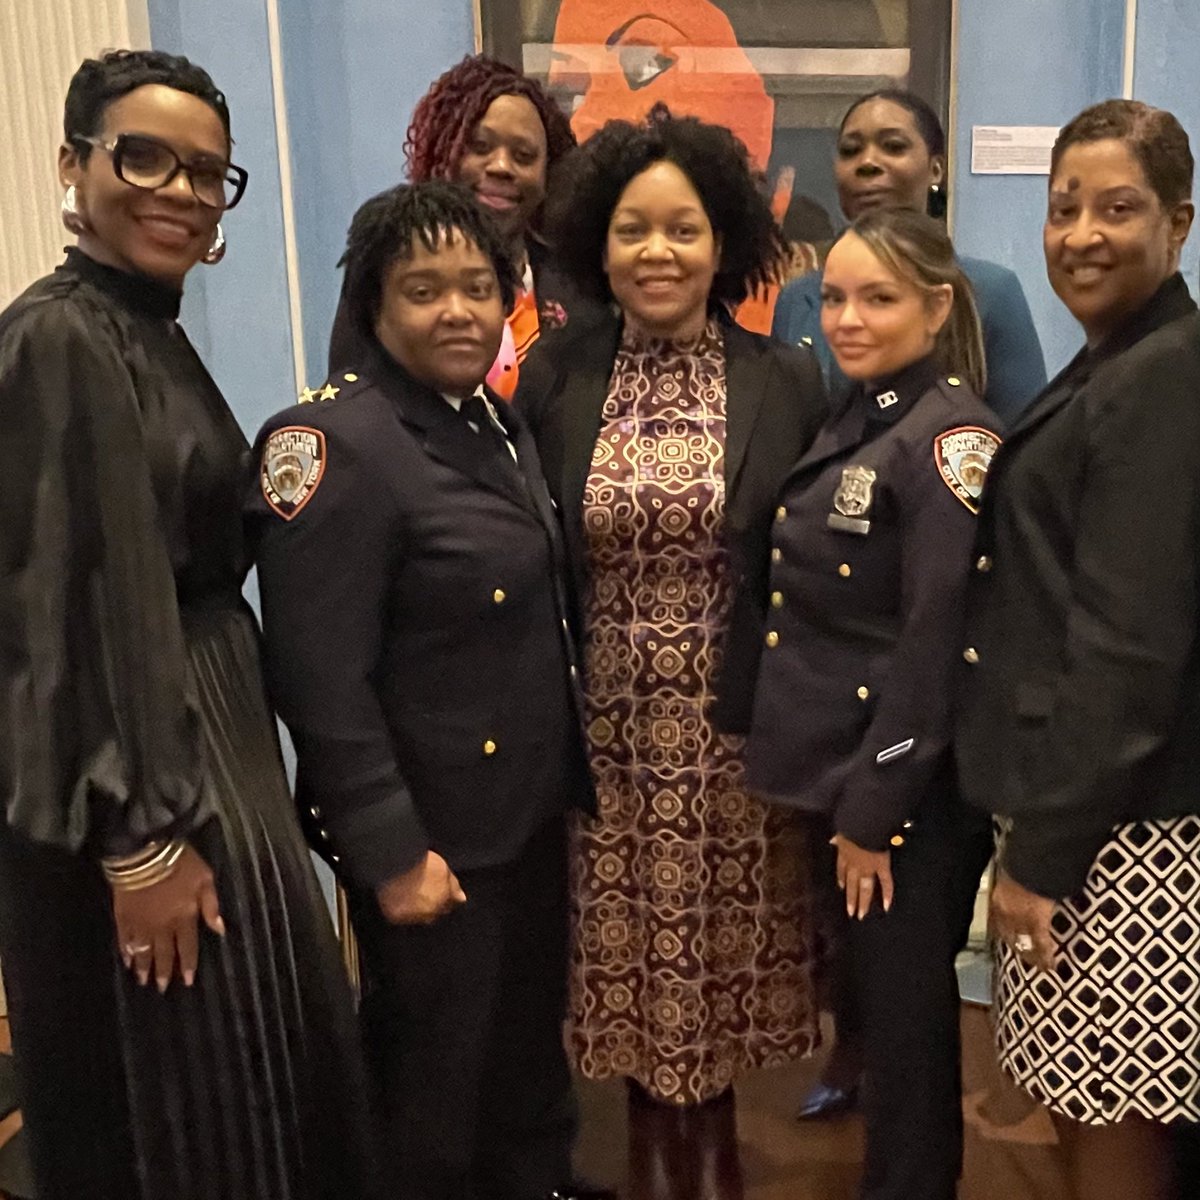 Last week, @DOCCommish, #DOC Executive Leadership administrators, #CorrectionOfficers, @NYCCOBA1 officials and many others joined @NYCMayor at #GracieMansion to celebrate #WomensHistoryMonth. Read more today at bit.ly/4awmTmA.